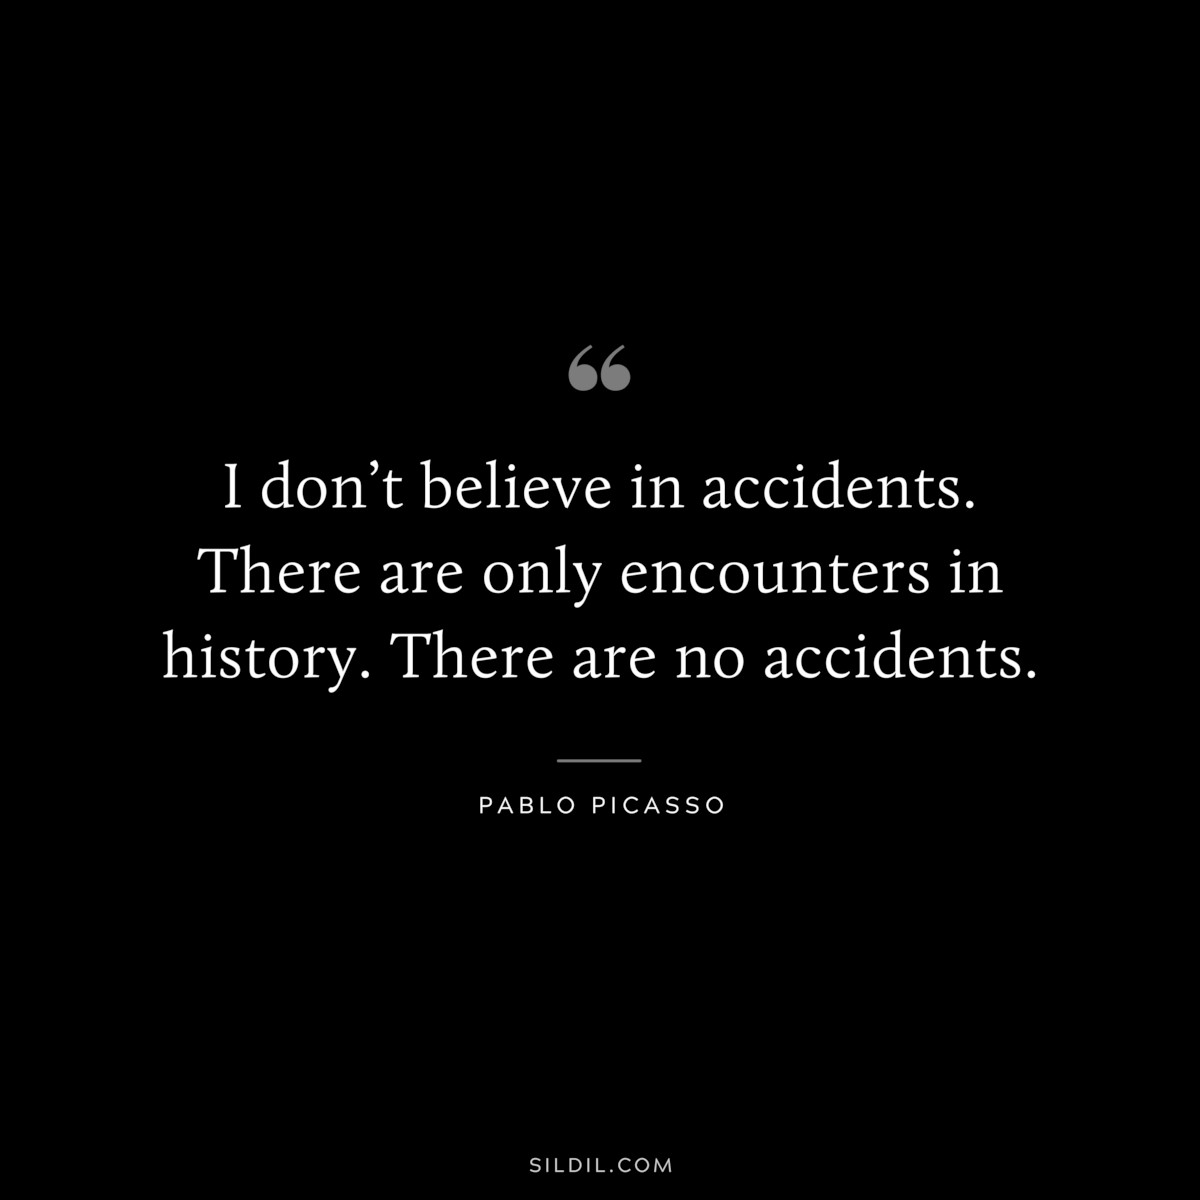 I don’t believe in accidents. There are only encounters in history. There are no accidents. ― Pablo Picasso